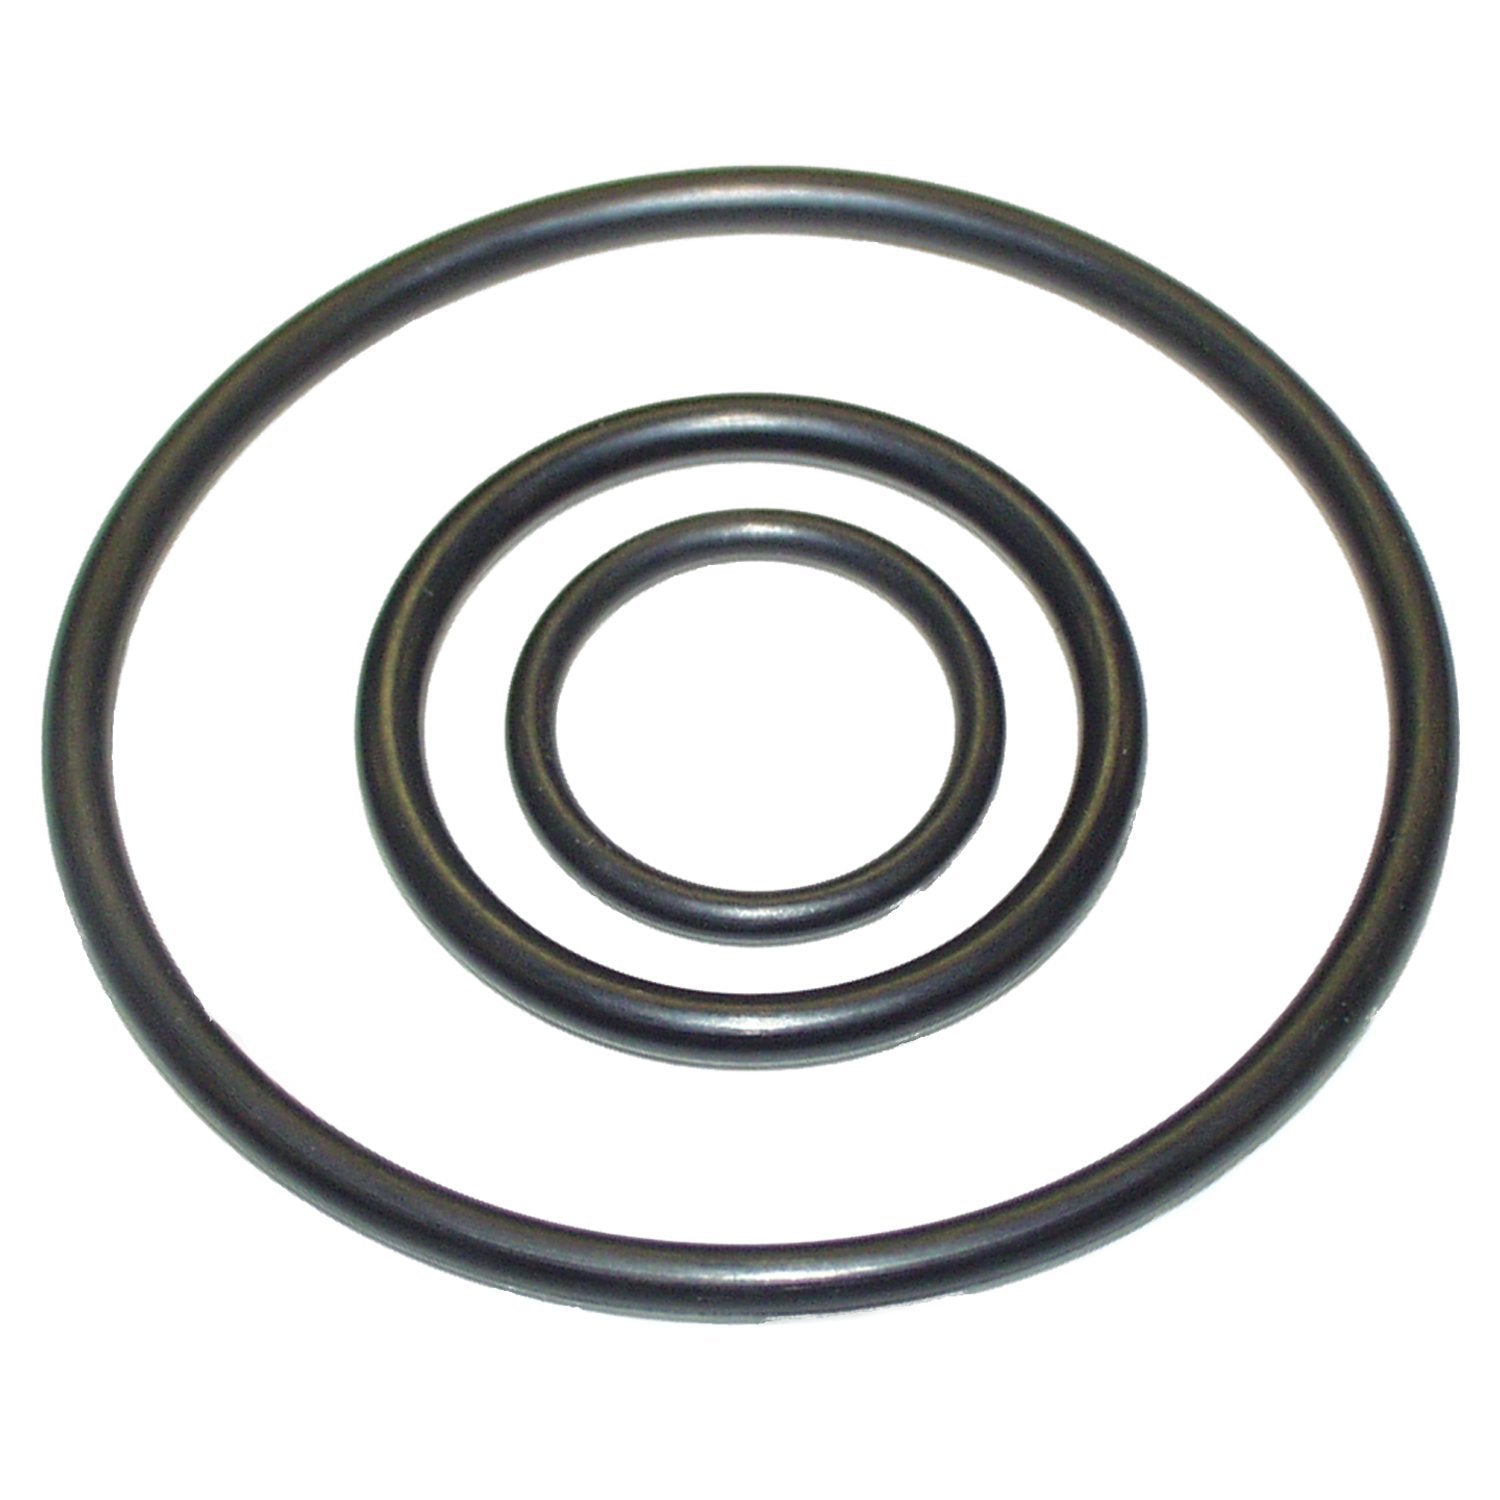 Oil Filter Adapter O-Ring Kit for 87-92 XJ Cherokee and MJ Comanche w/ 4.0L